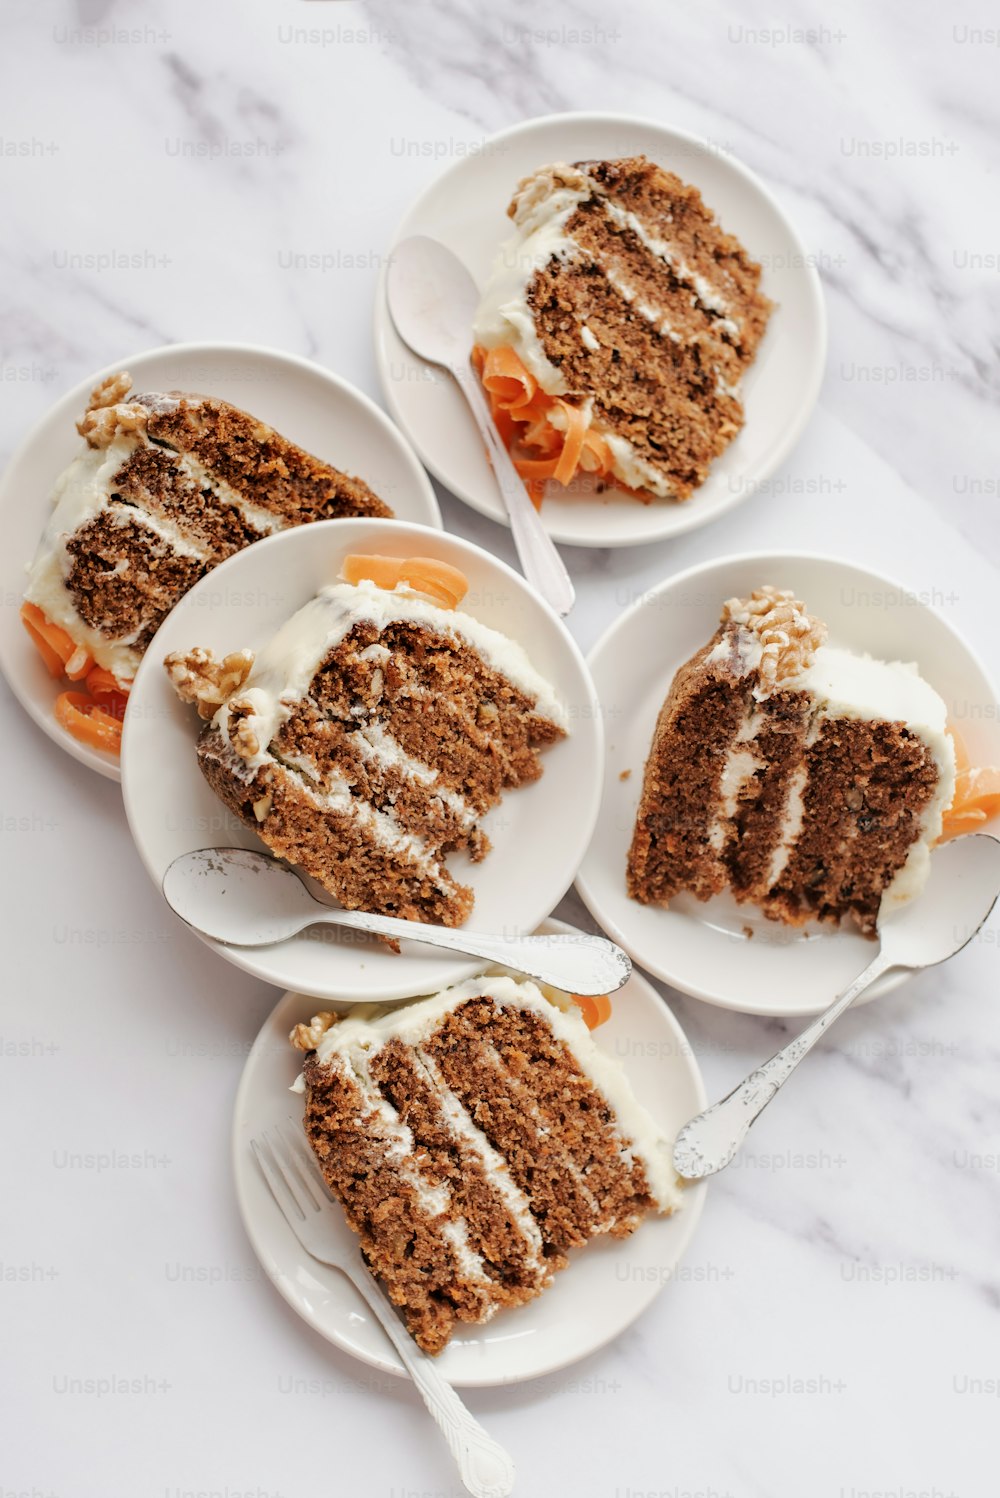 four plates with slices of carrot cake on them